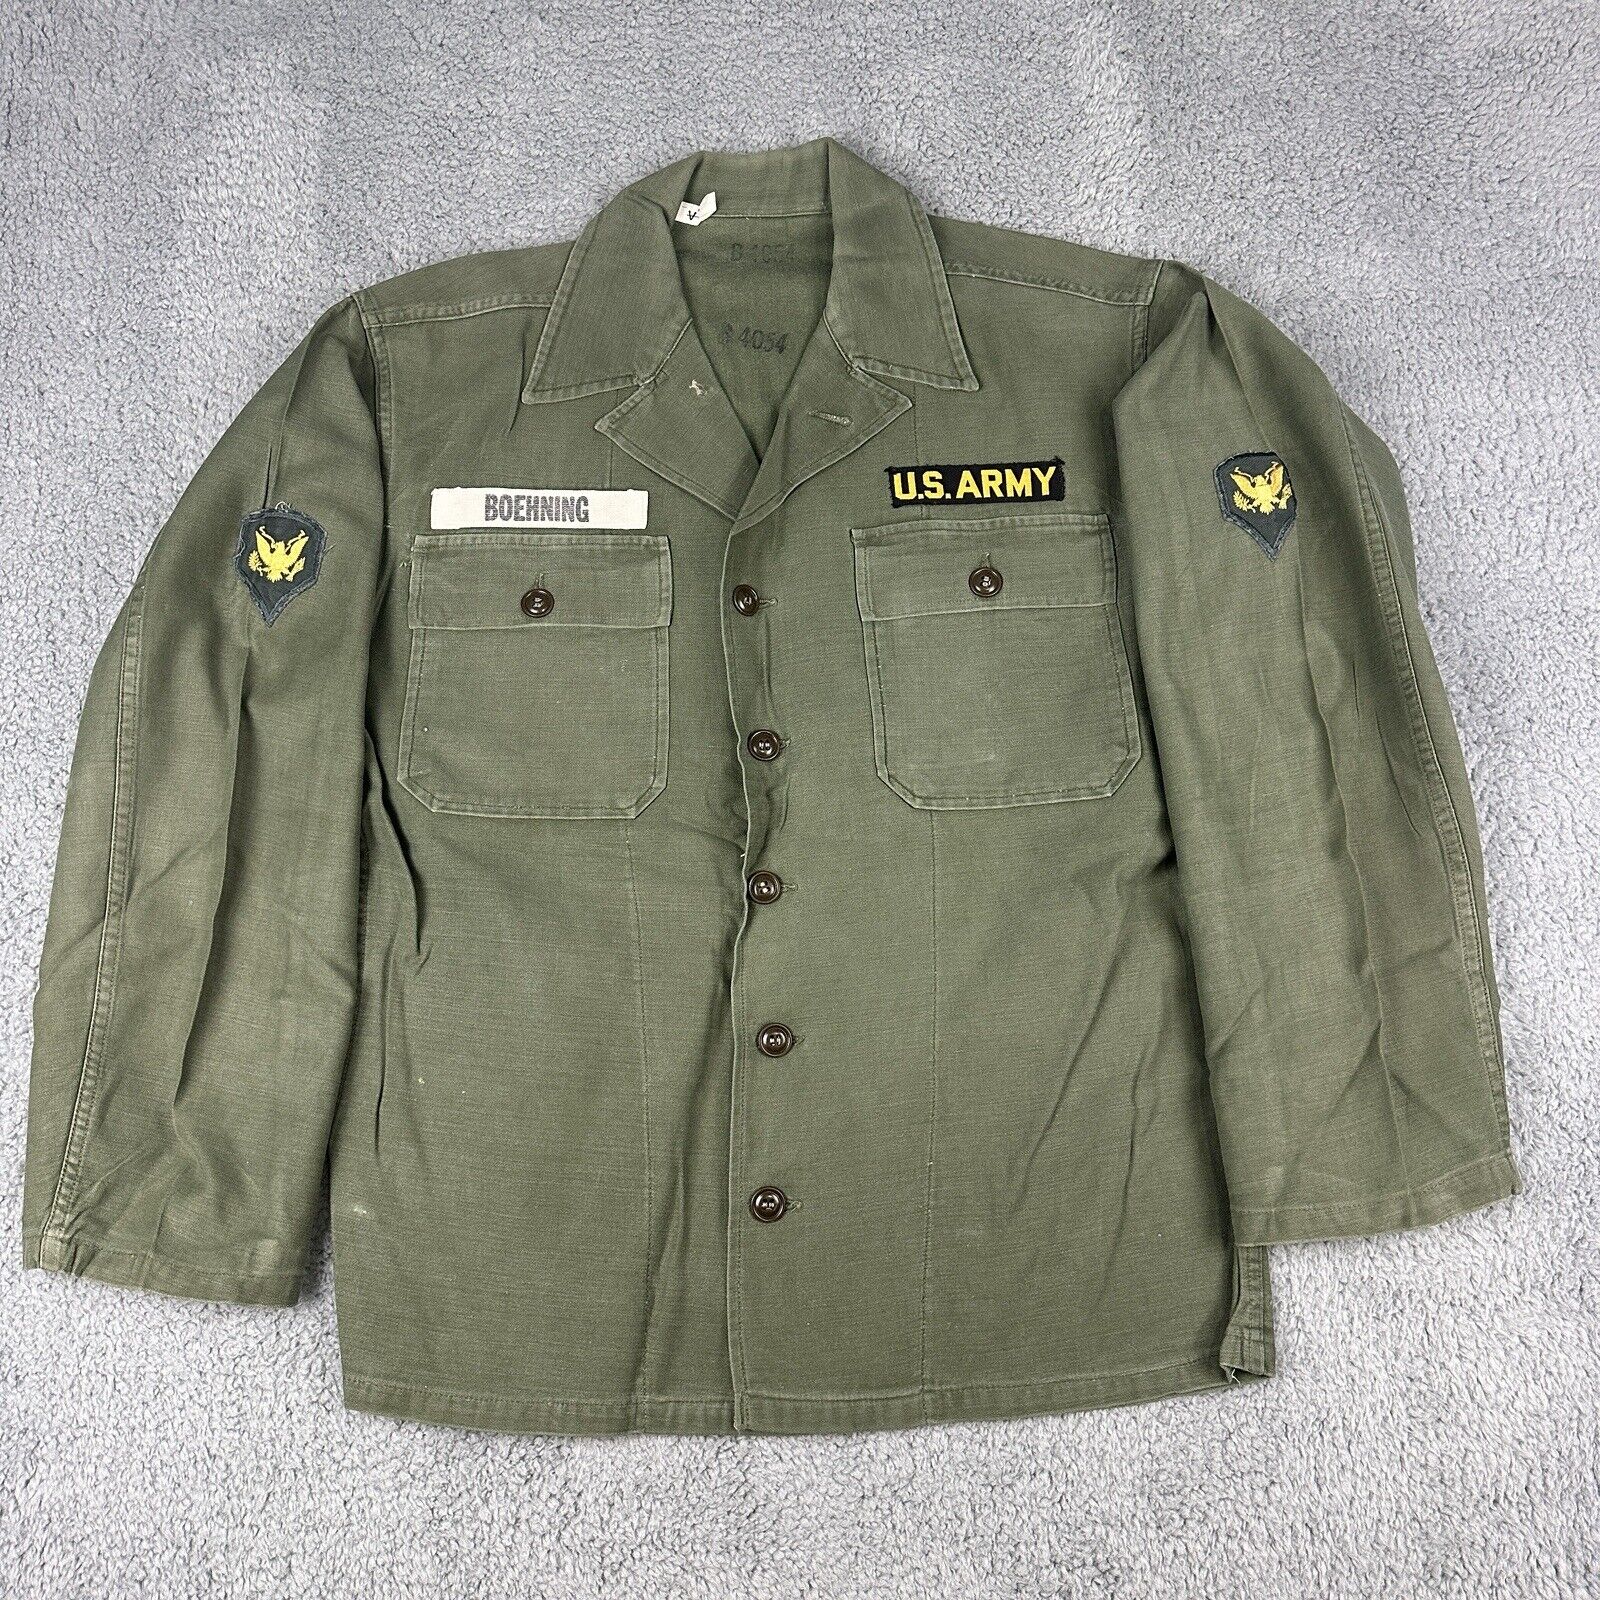 Mens Vintage 1950s 1960s US Army Vietnam War Sateen Utility Shirt Patches Green